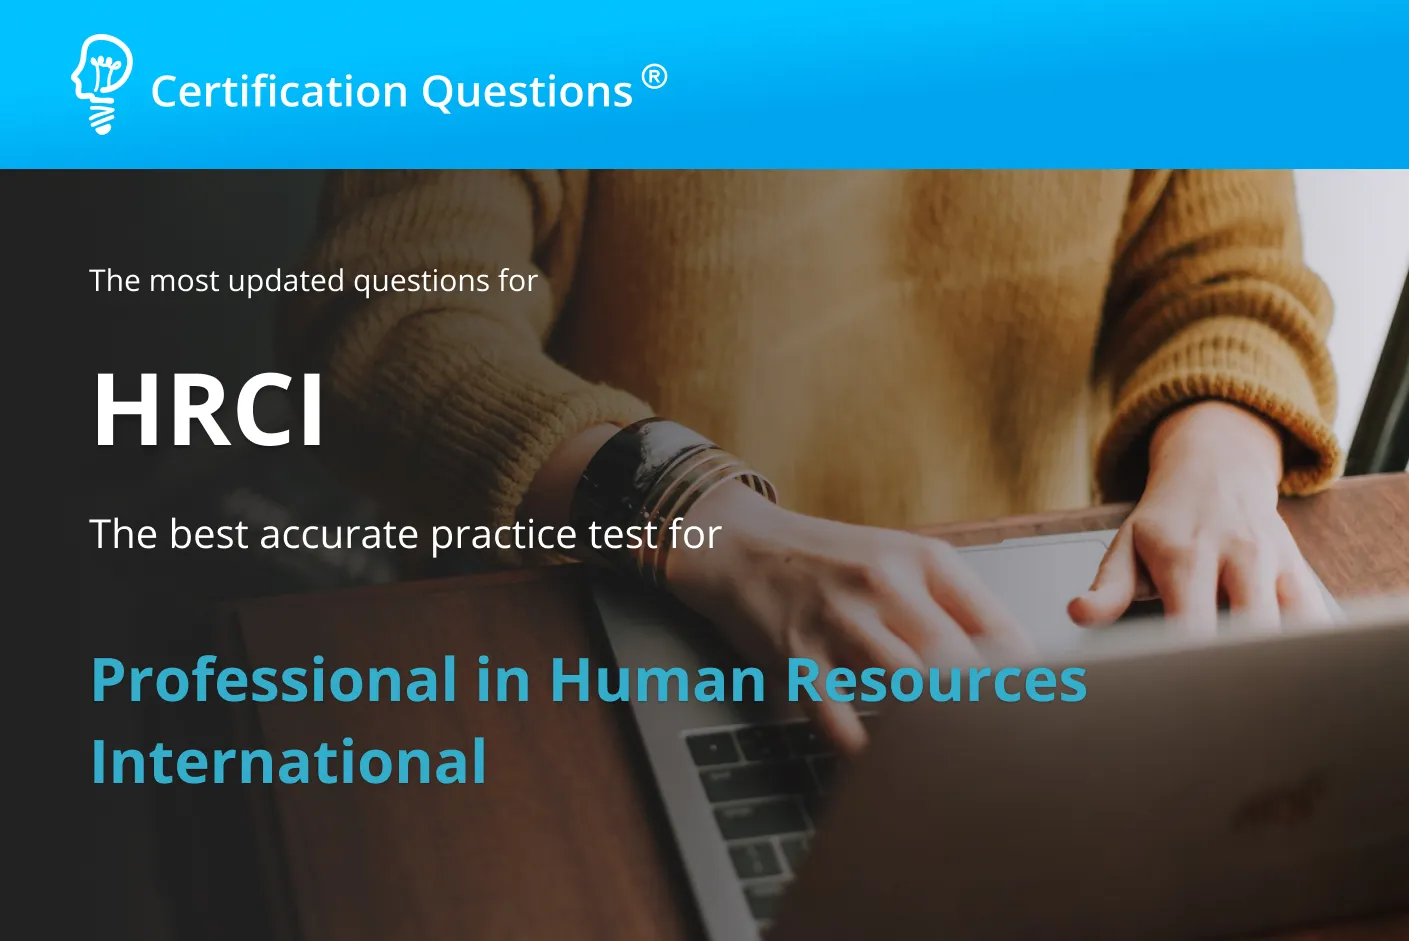 This image represents the Professional in human resources international practice test